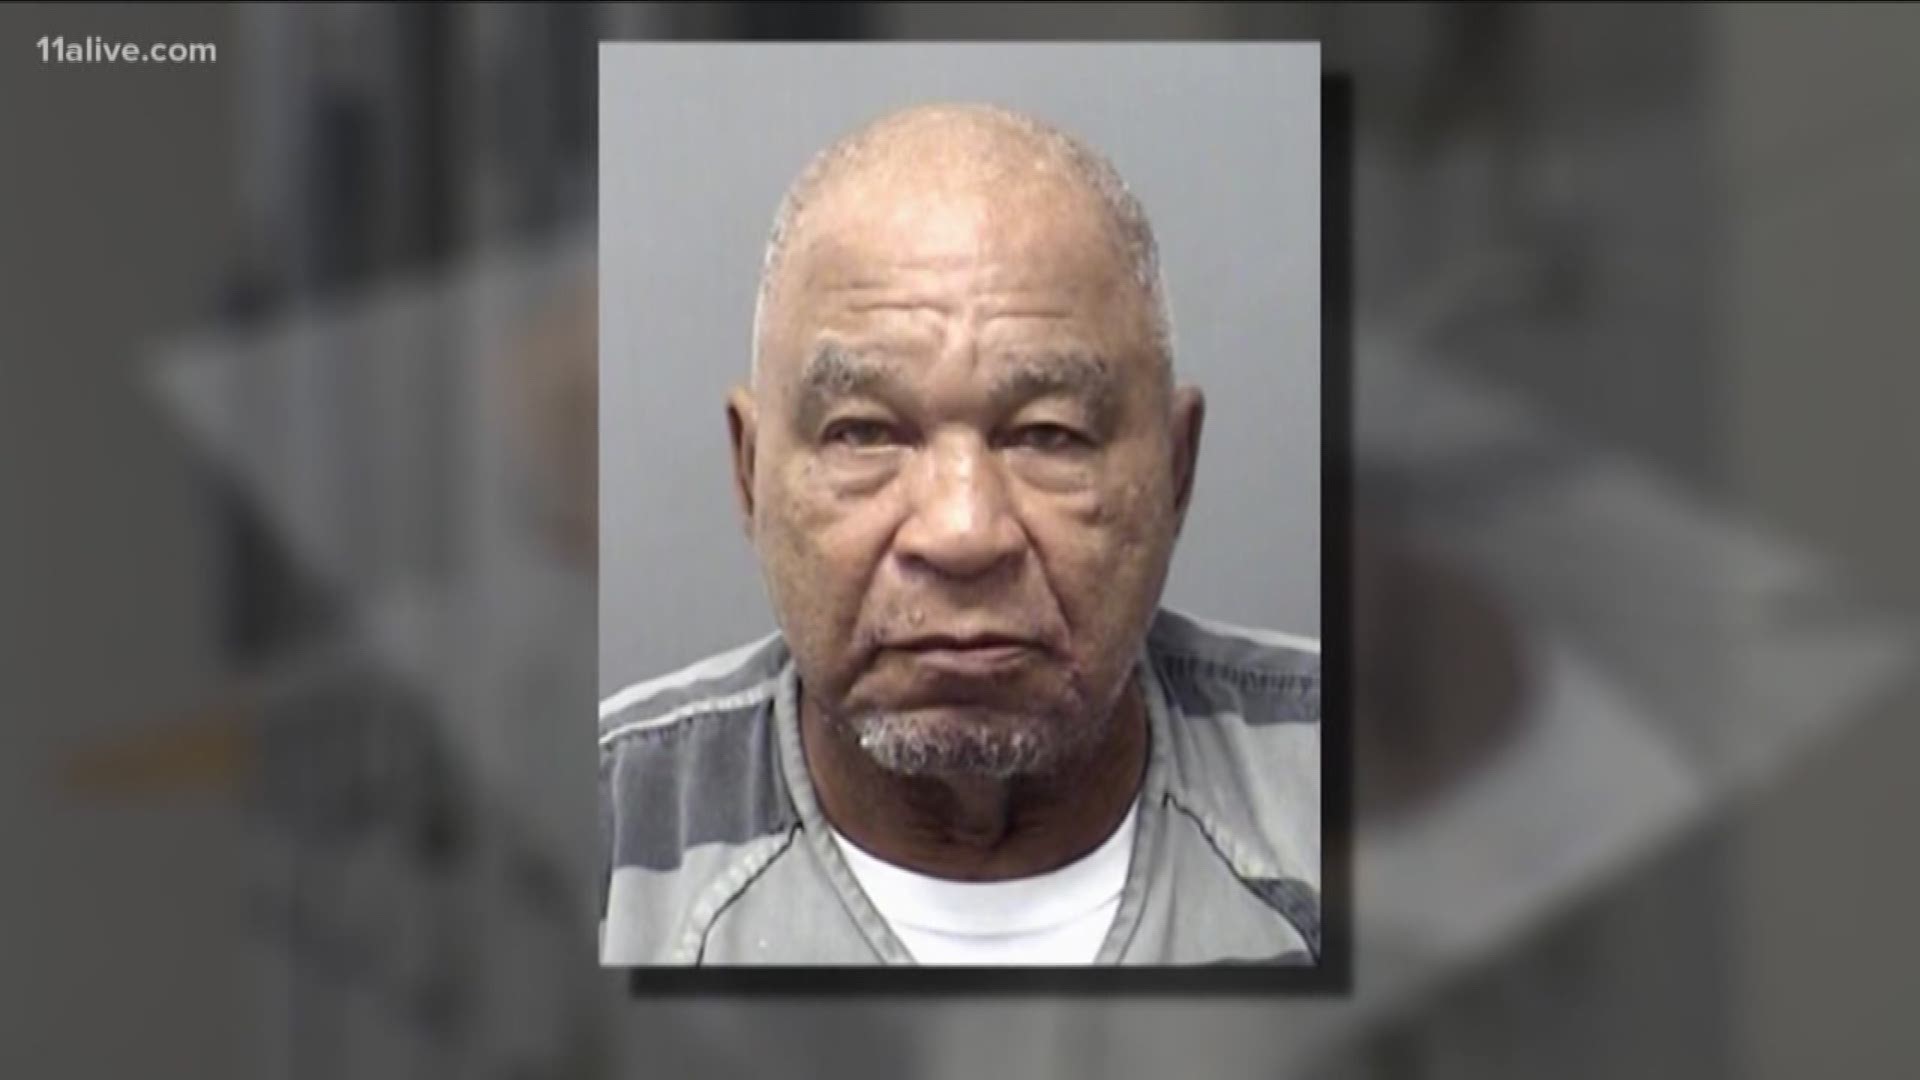 Samuel Little, born in Reynolds, Georgia, is behind bars for murdering three California women in the 1980s. Now, he's cooperating with police across the country to provide information on up to 100 homicides - including Georgia.